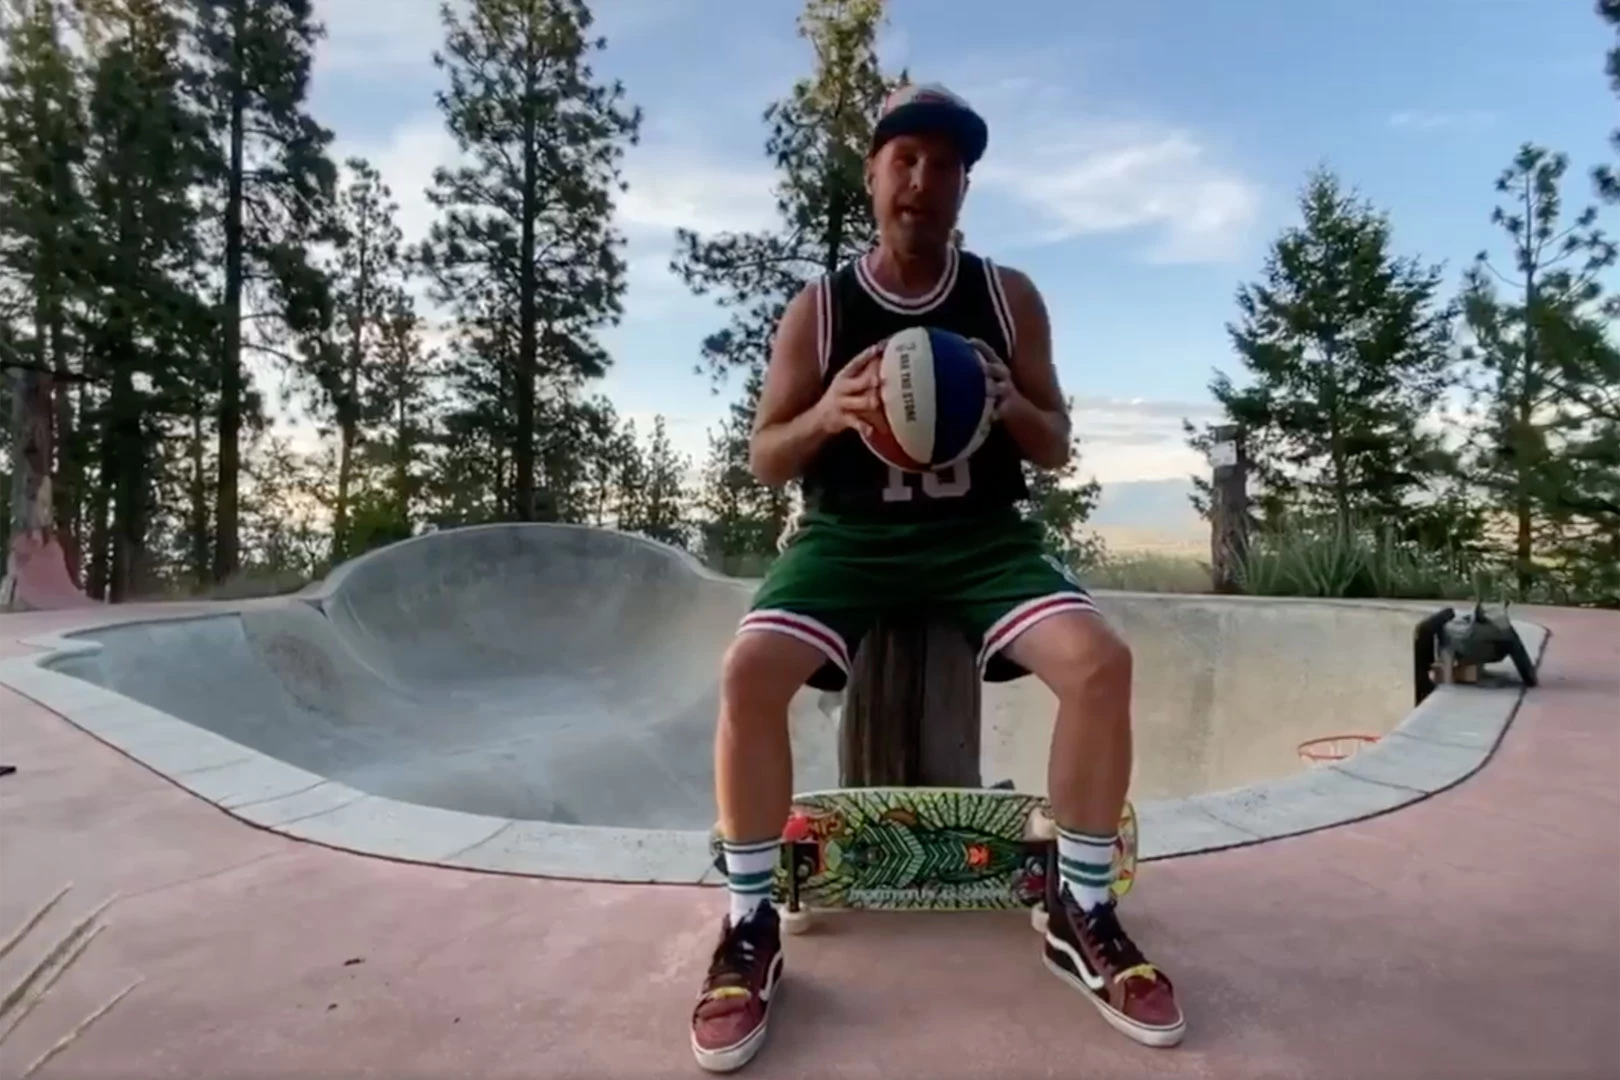 Jeff Ament Performs Basketball 'Trick Shot' for ALS Challenge